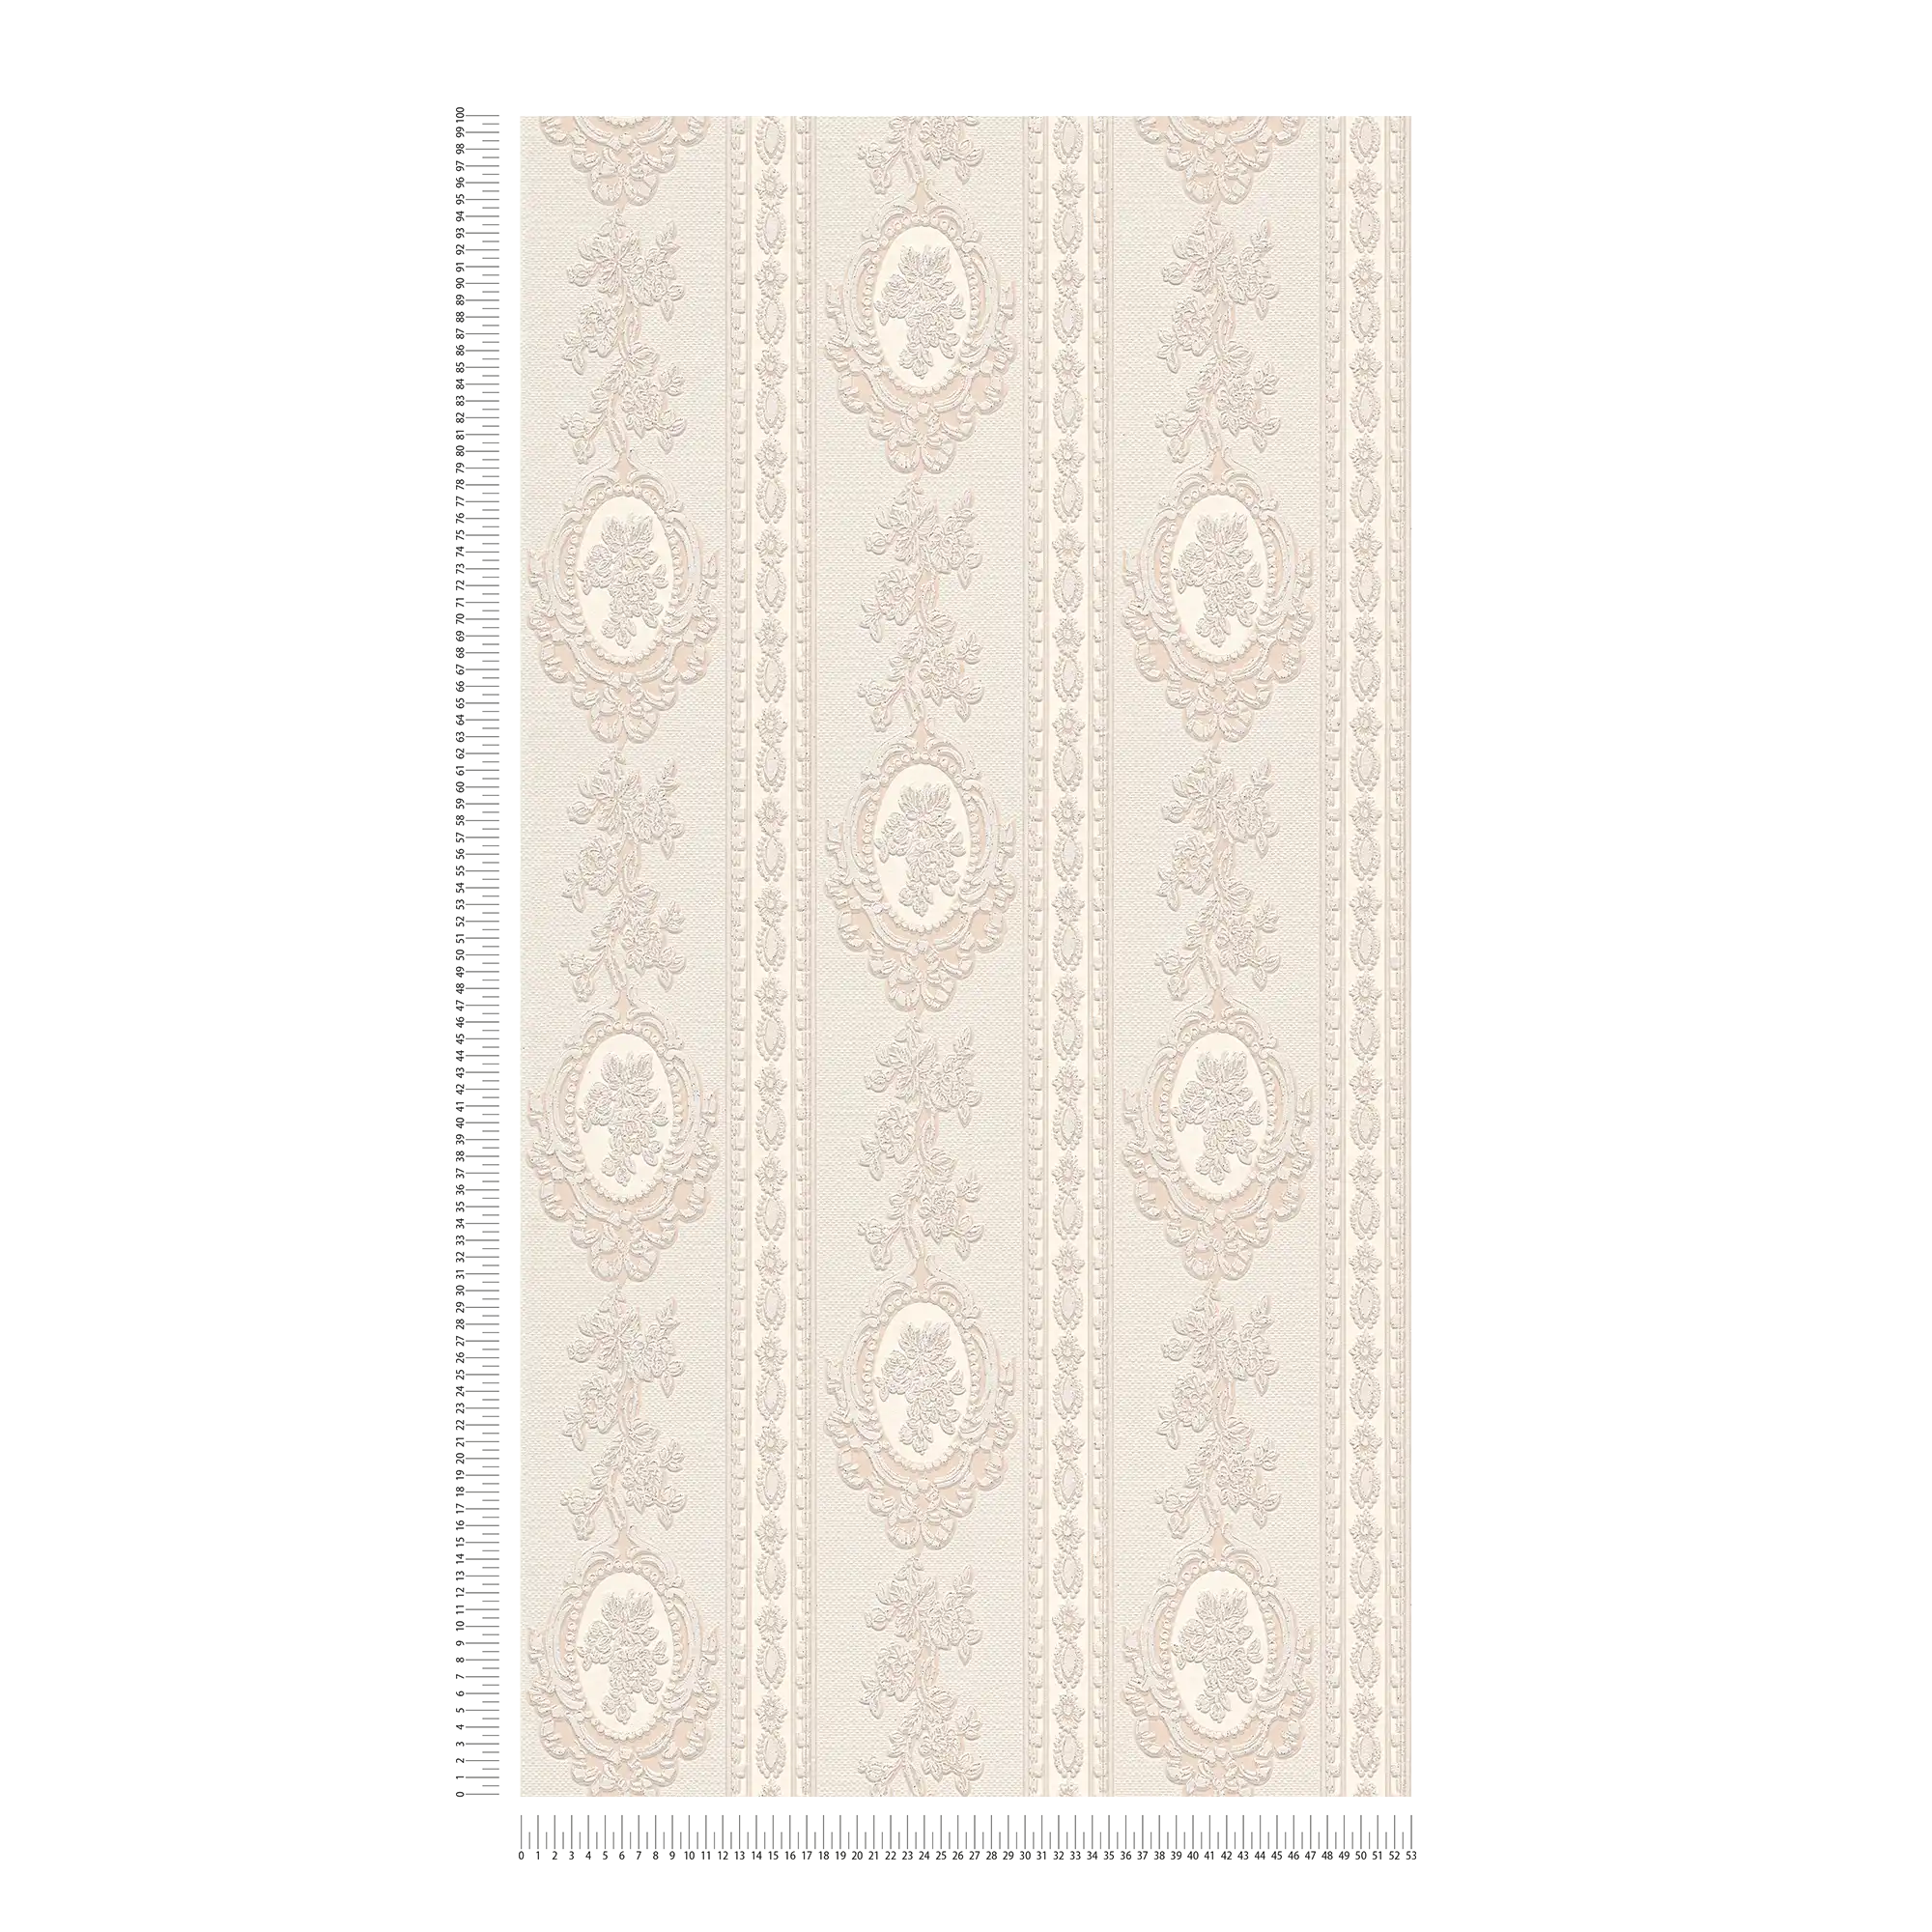             Ornamental wallpaper floral elements, stripes and flowers - beige, cream, silver
        